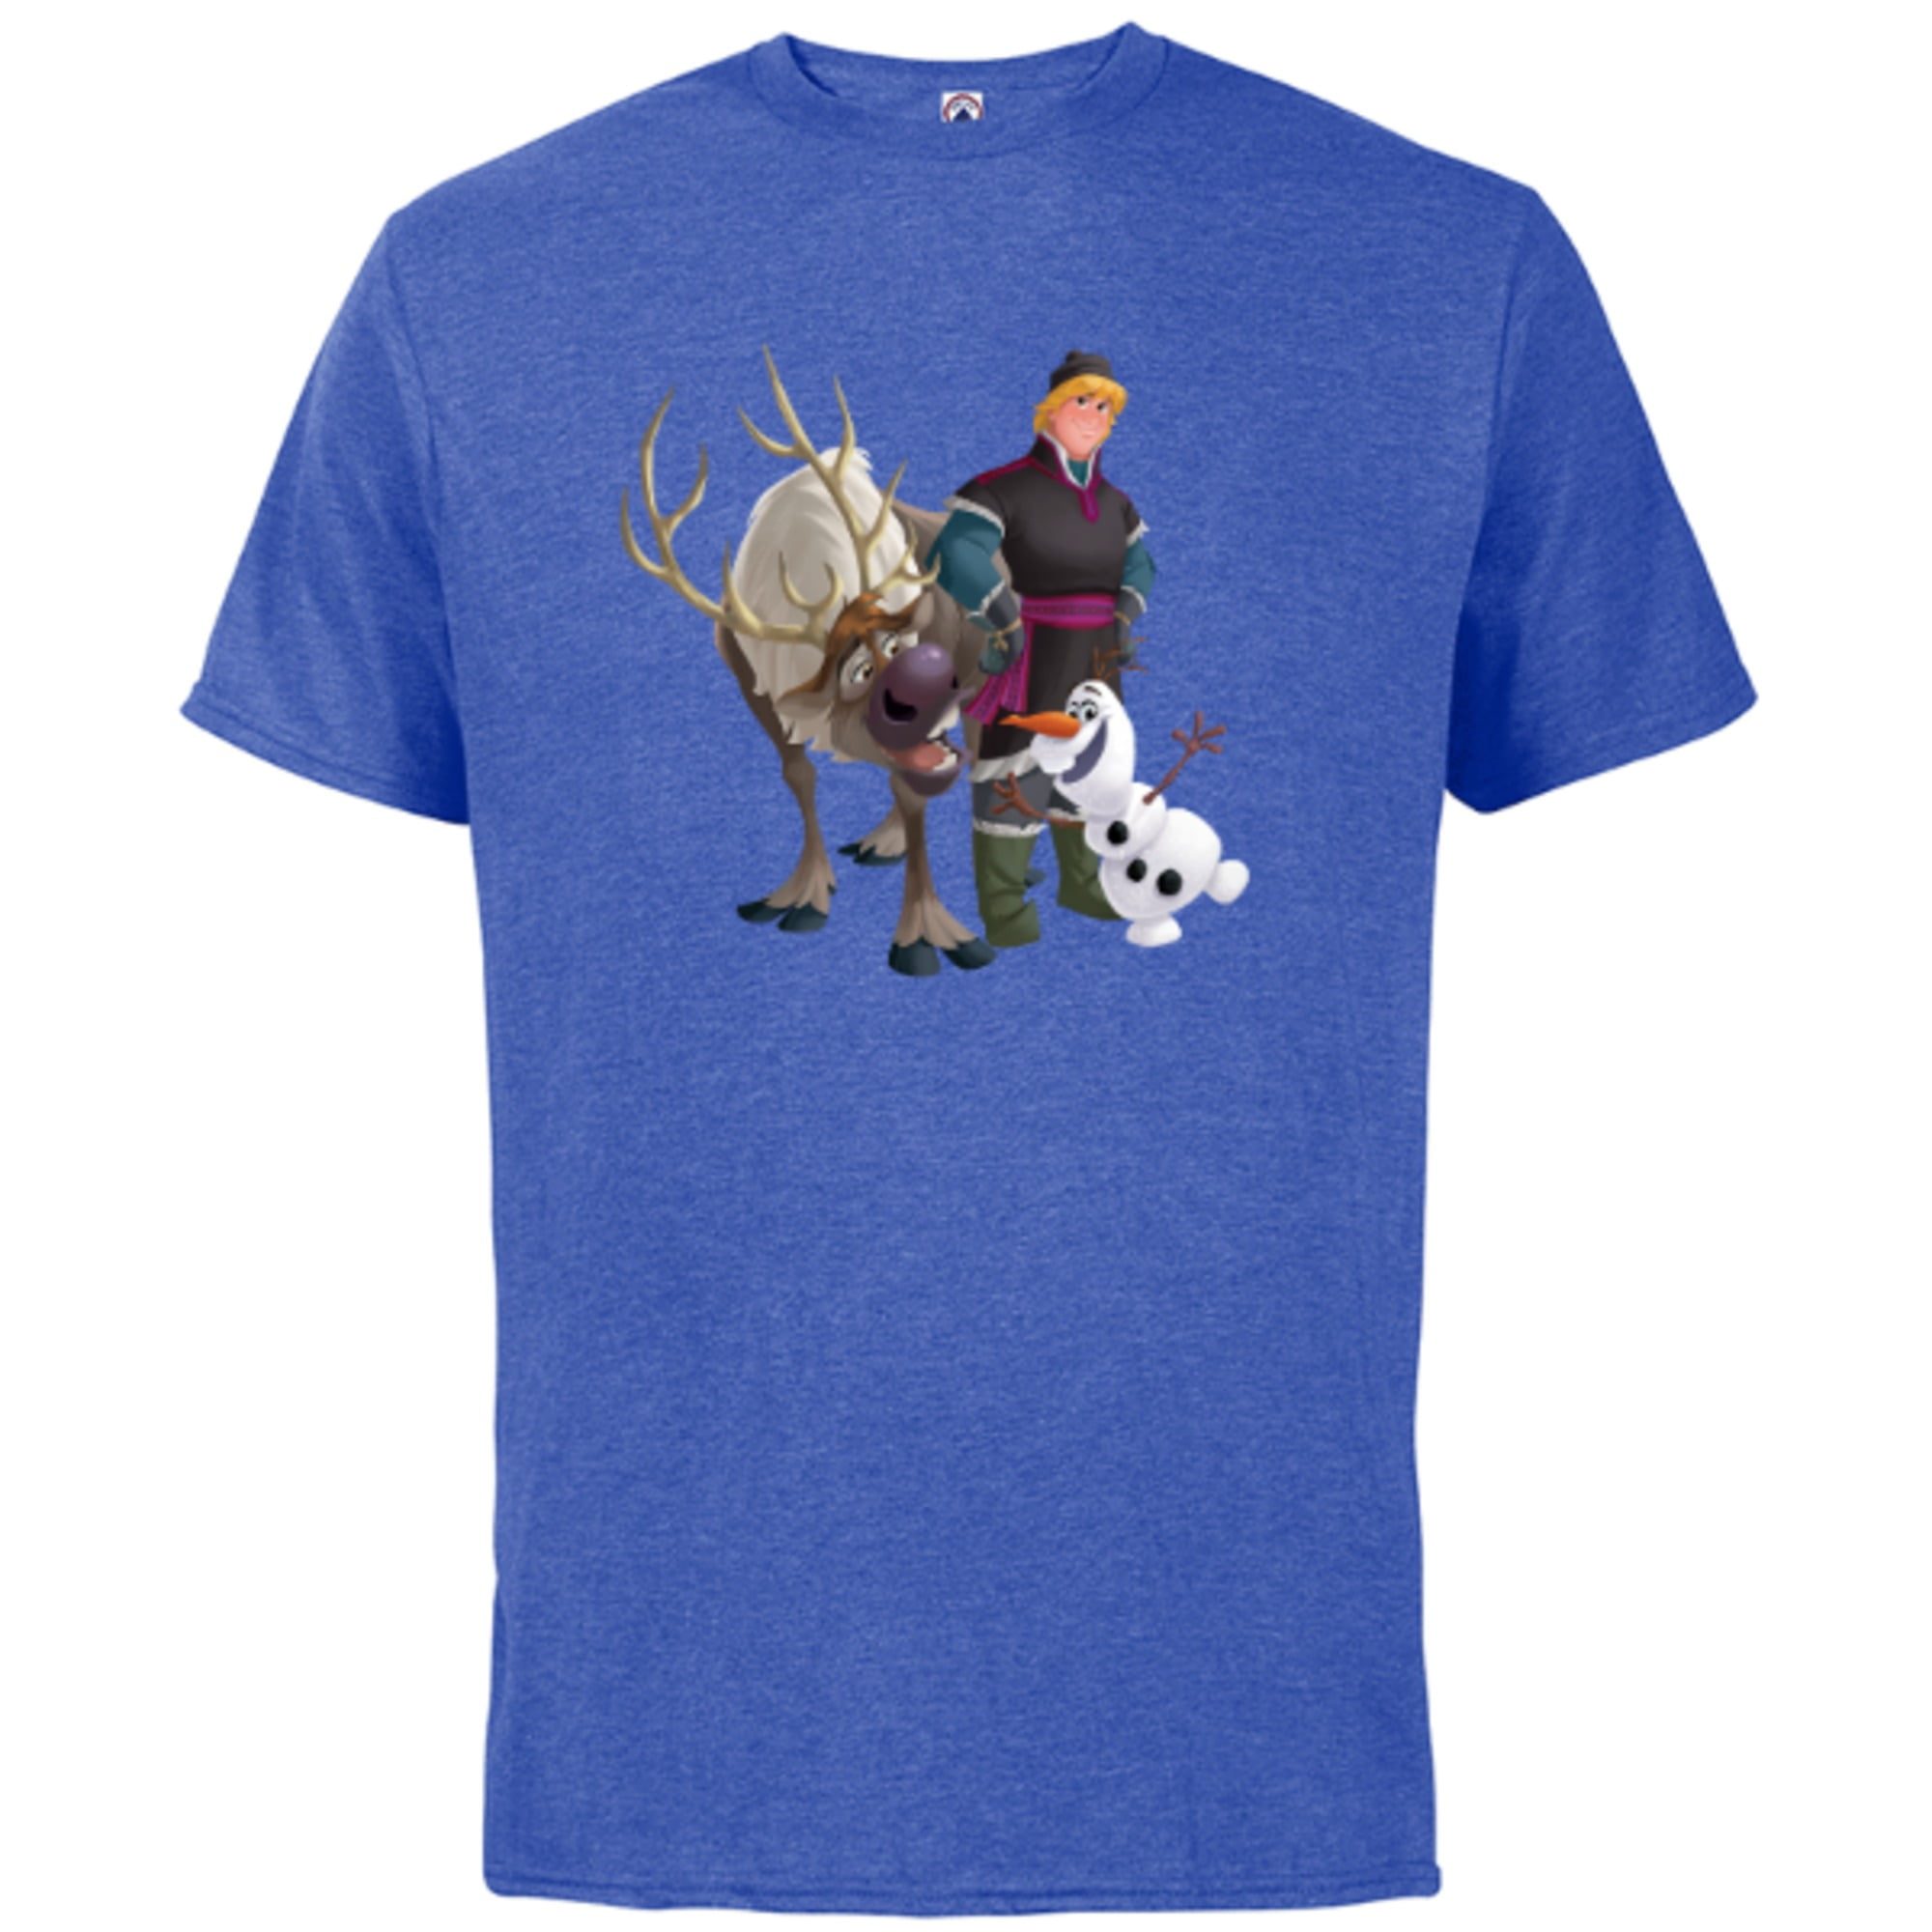 Disney Frozen Kristoff Olaf Sven T-Shirt - Short Sleeve Cotton T-Shirt for  Adults - Customized-Charcoal Heather